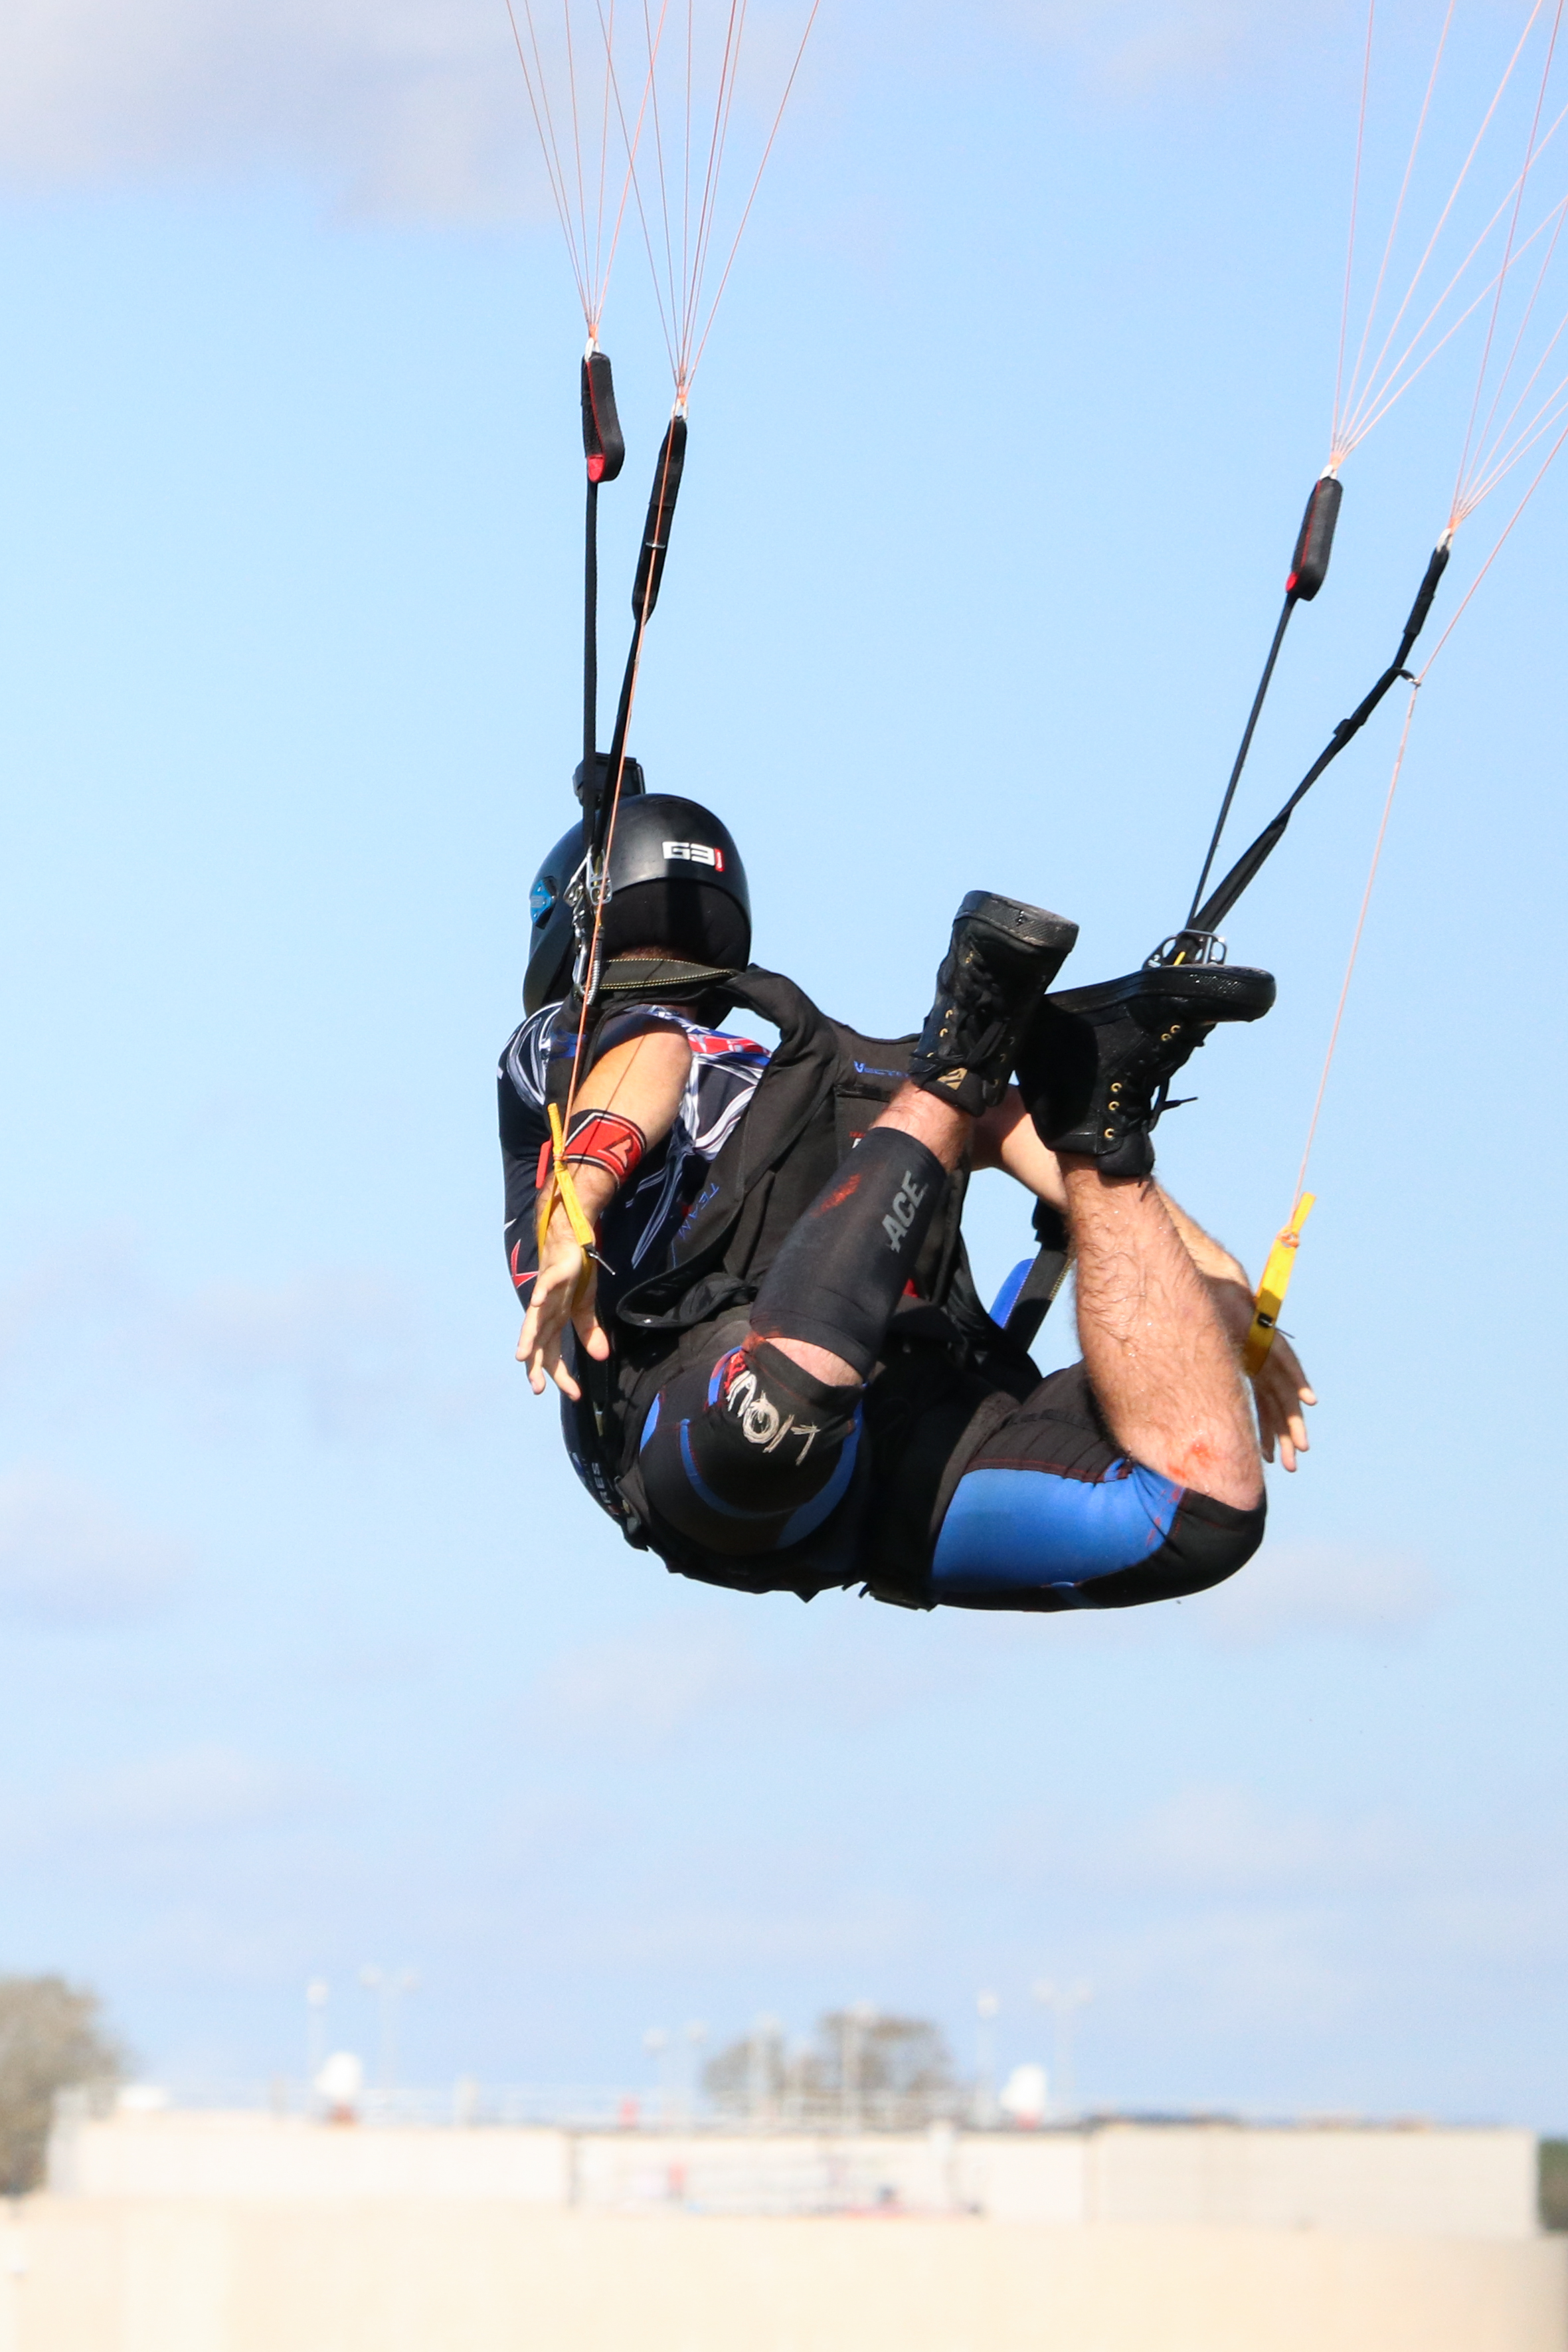 High-Kick-Photography-Skydiving-Canopy-Piloting-Swoop-High-Performance-Parachute-Skydive-City-Zephyrhills-ZHills-Florida-Sports-Active-Competition-LR-6.jpg